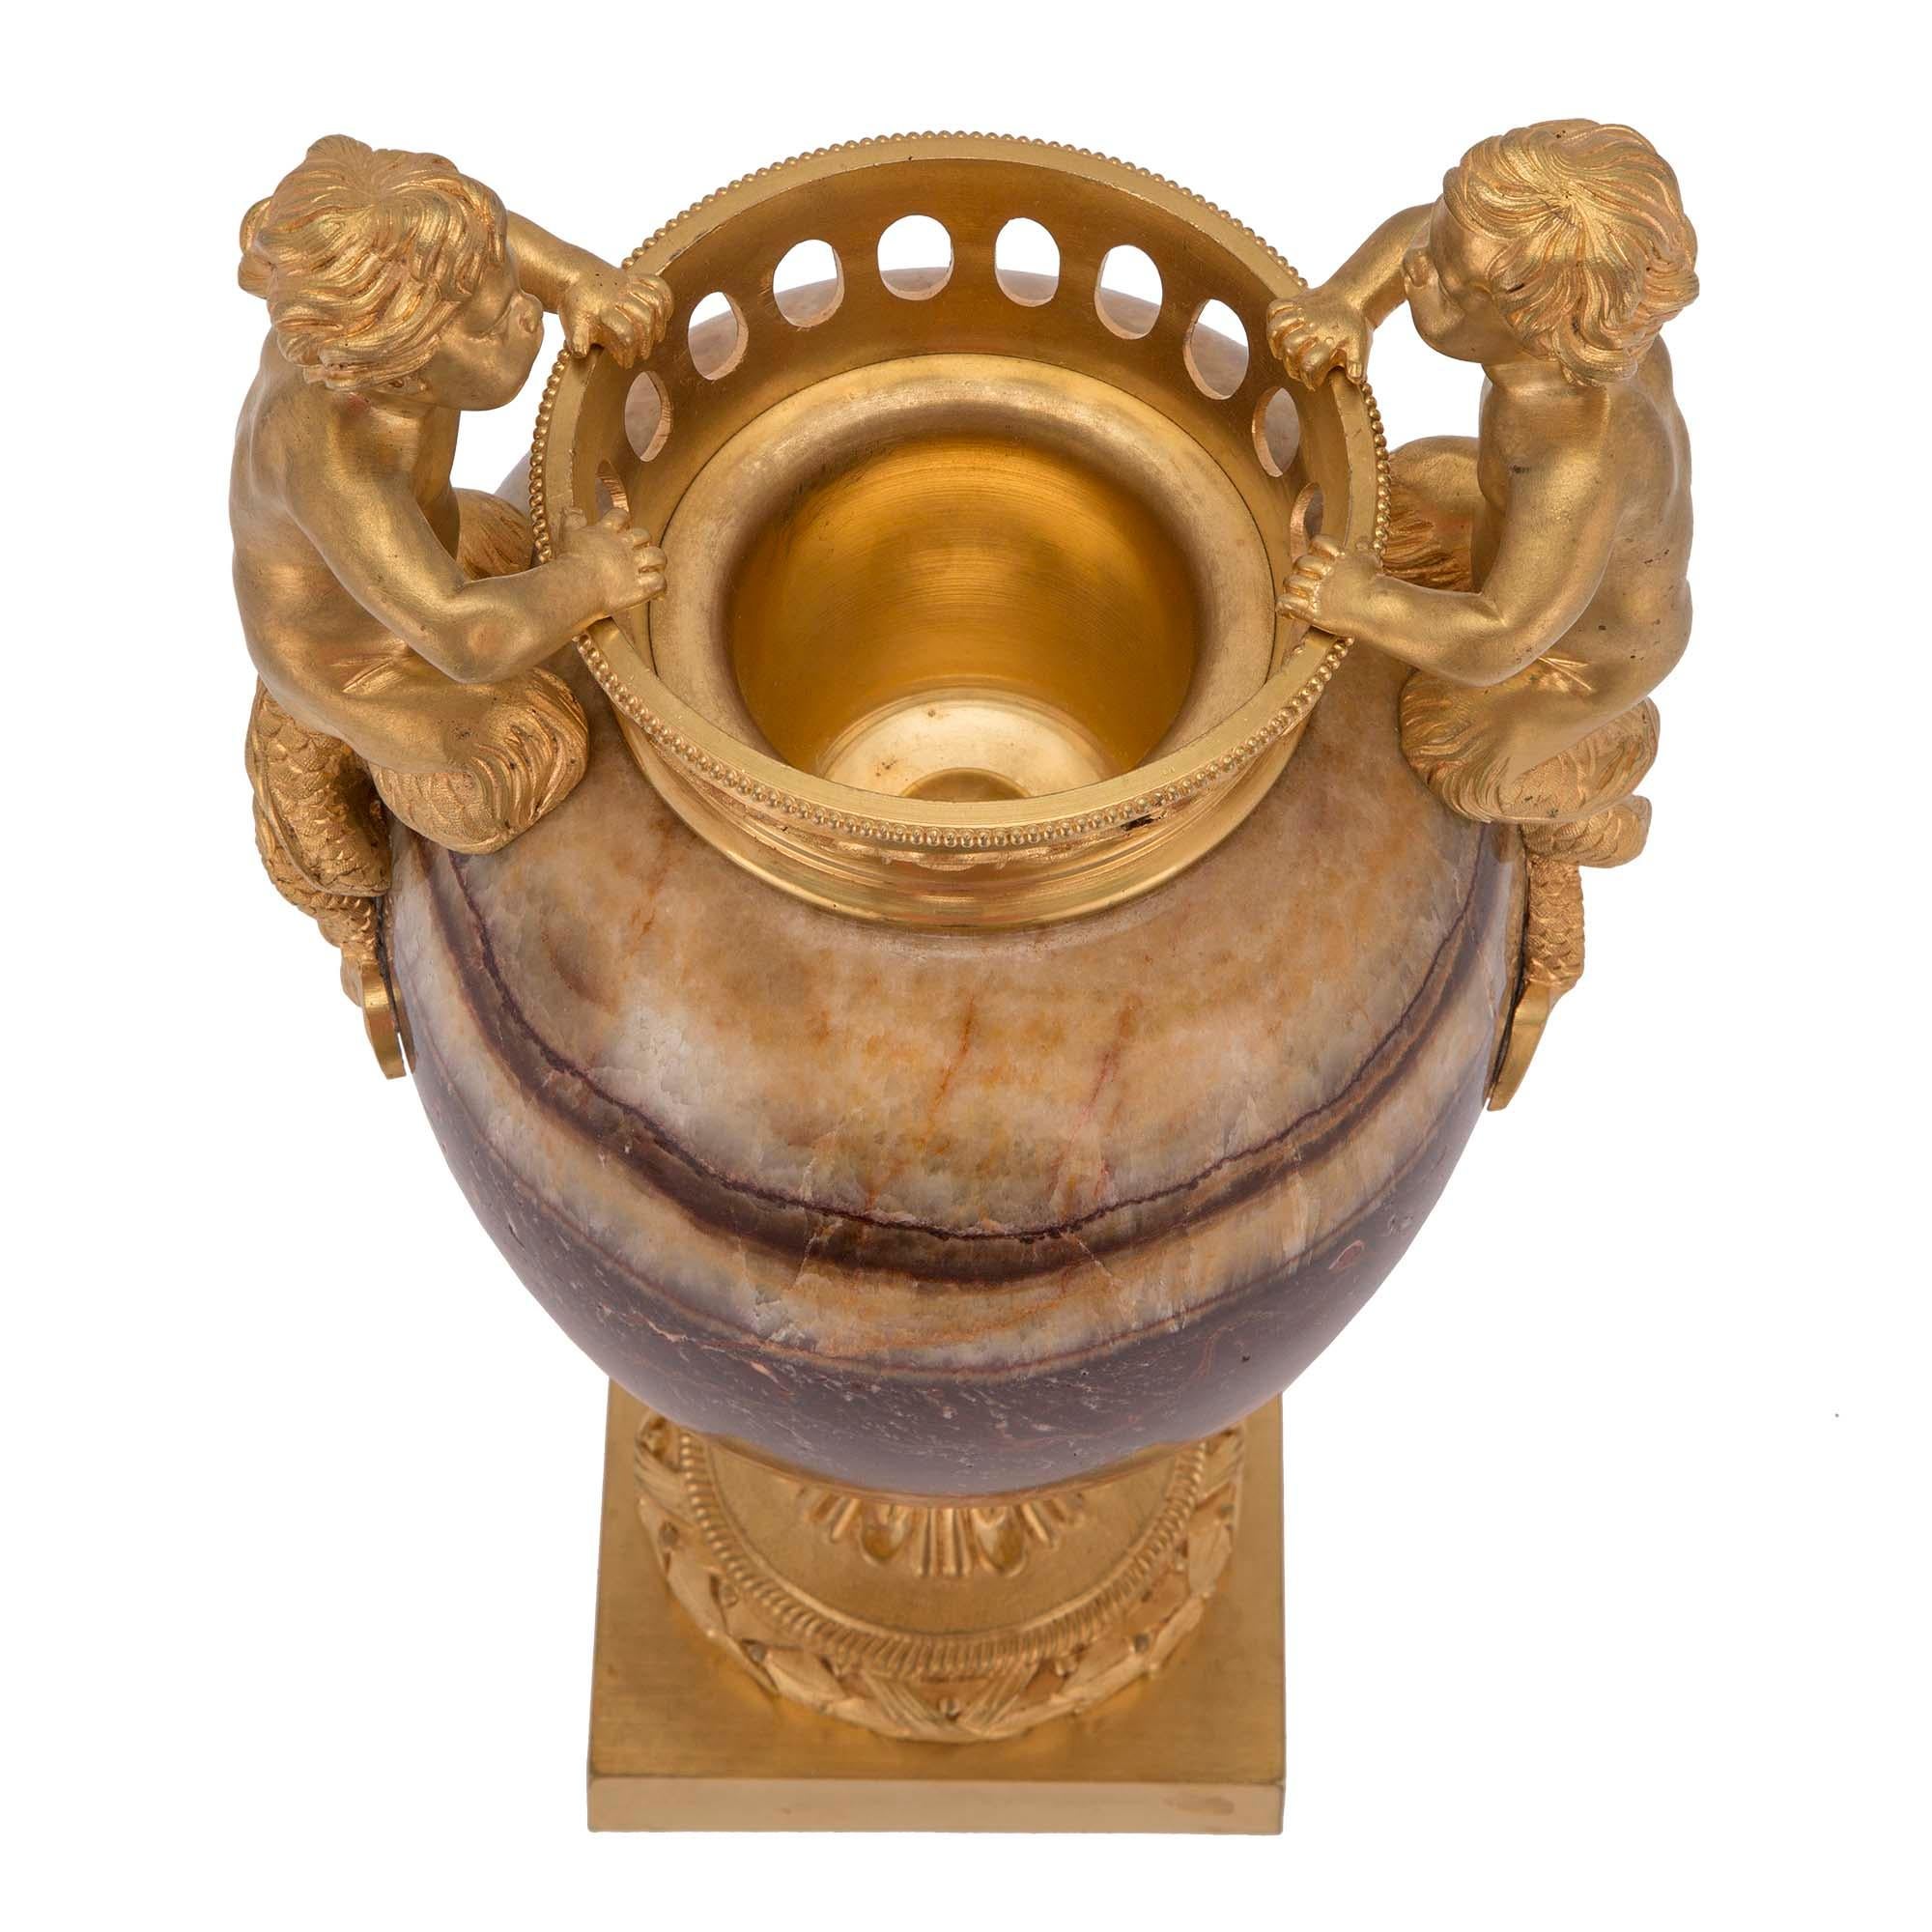 A truly stunning pair of French 19th century Louis XVI st. Agate and ormolu urns. Each is raised on a square ormolu base with laurel wreath and fluted socle with large foliate. The beautiful and impressive richly hued agate body is decorated with